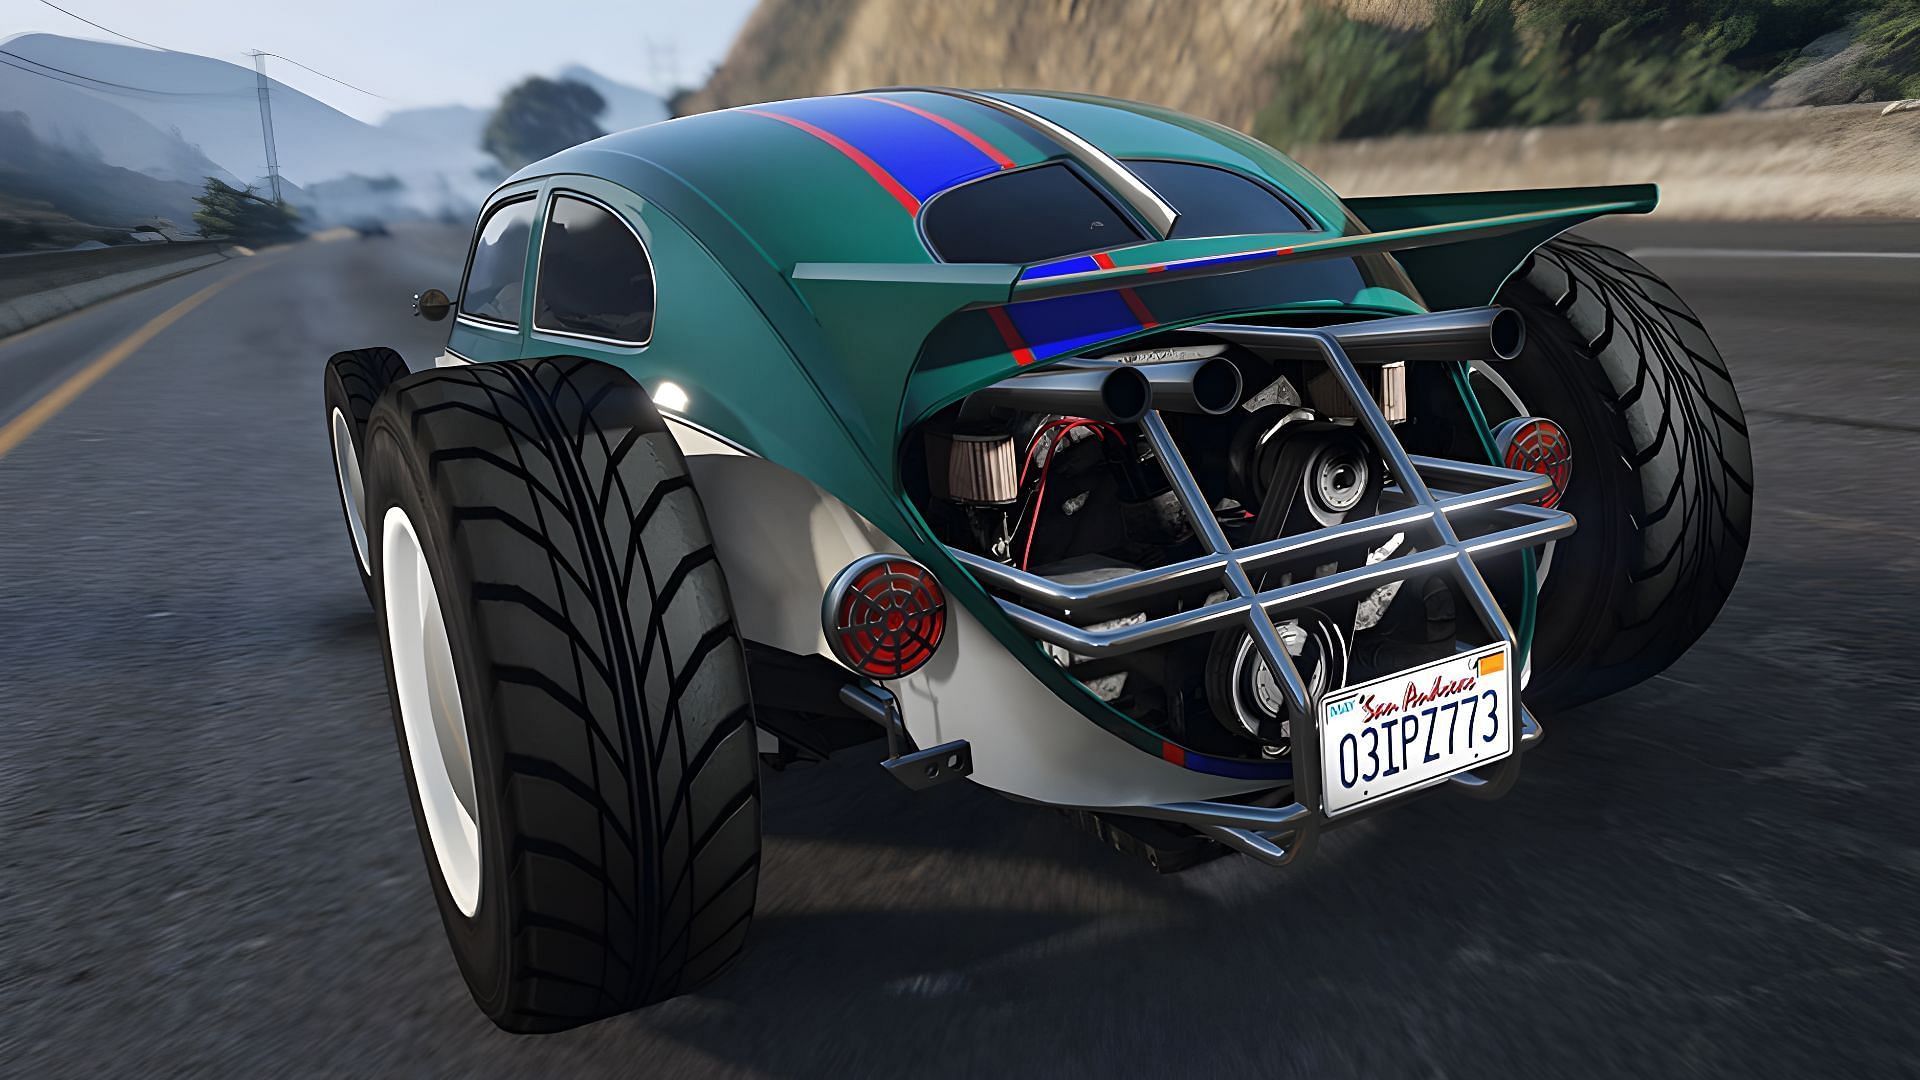 The Weevil Custom is one of the fastest in its vehicle class